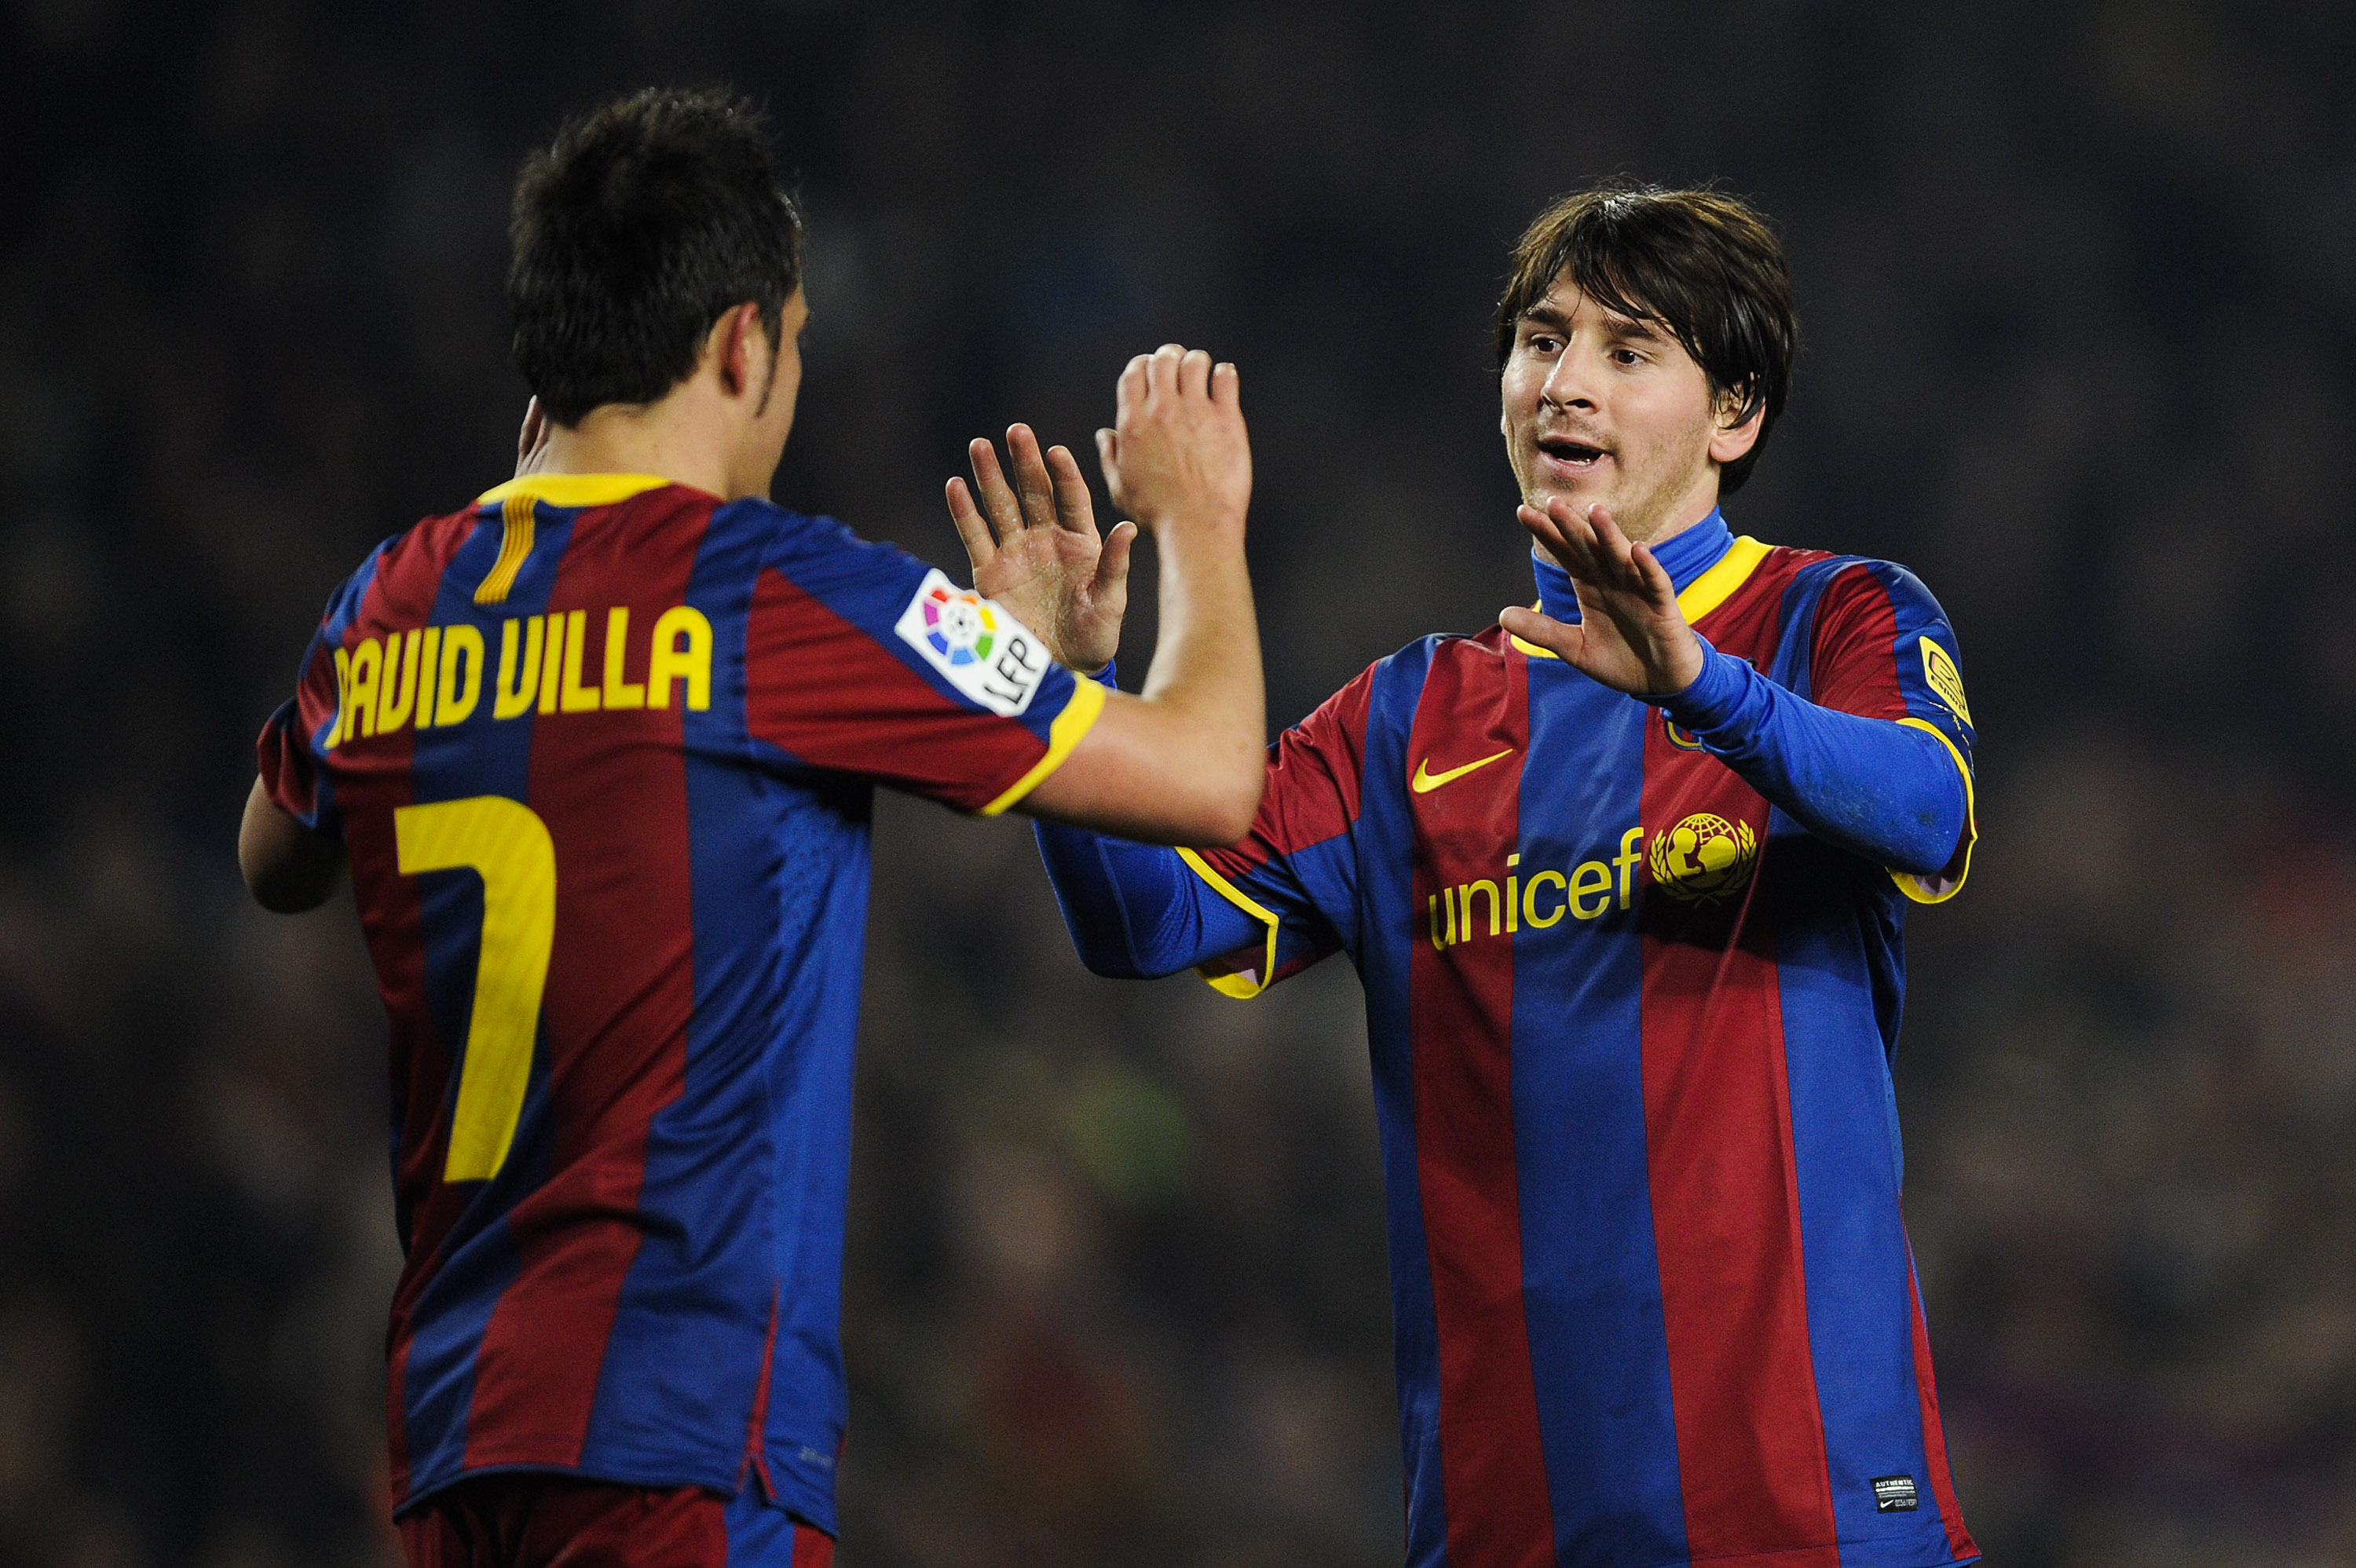 BARCELONA, SPAIN - FEBRUARY 05:  Lionel Messi of Barcelona (R) celebrates with his teammate David Villa after scoring his third goal during the La Liga match between Barcelona and Atletico de Madrid at Camp Nou on February 5, 2011 in Barcelona, Spain.  (P